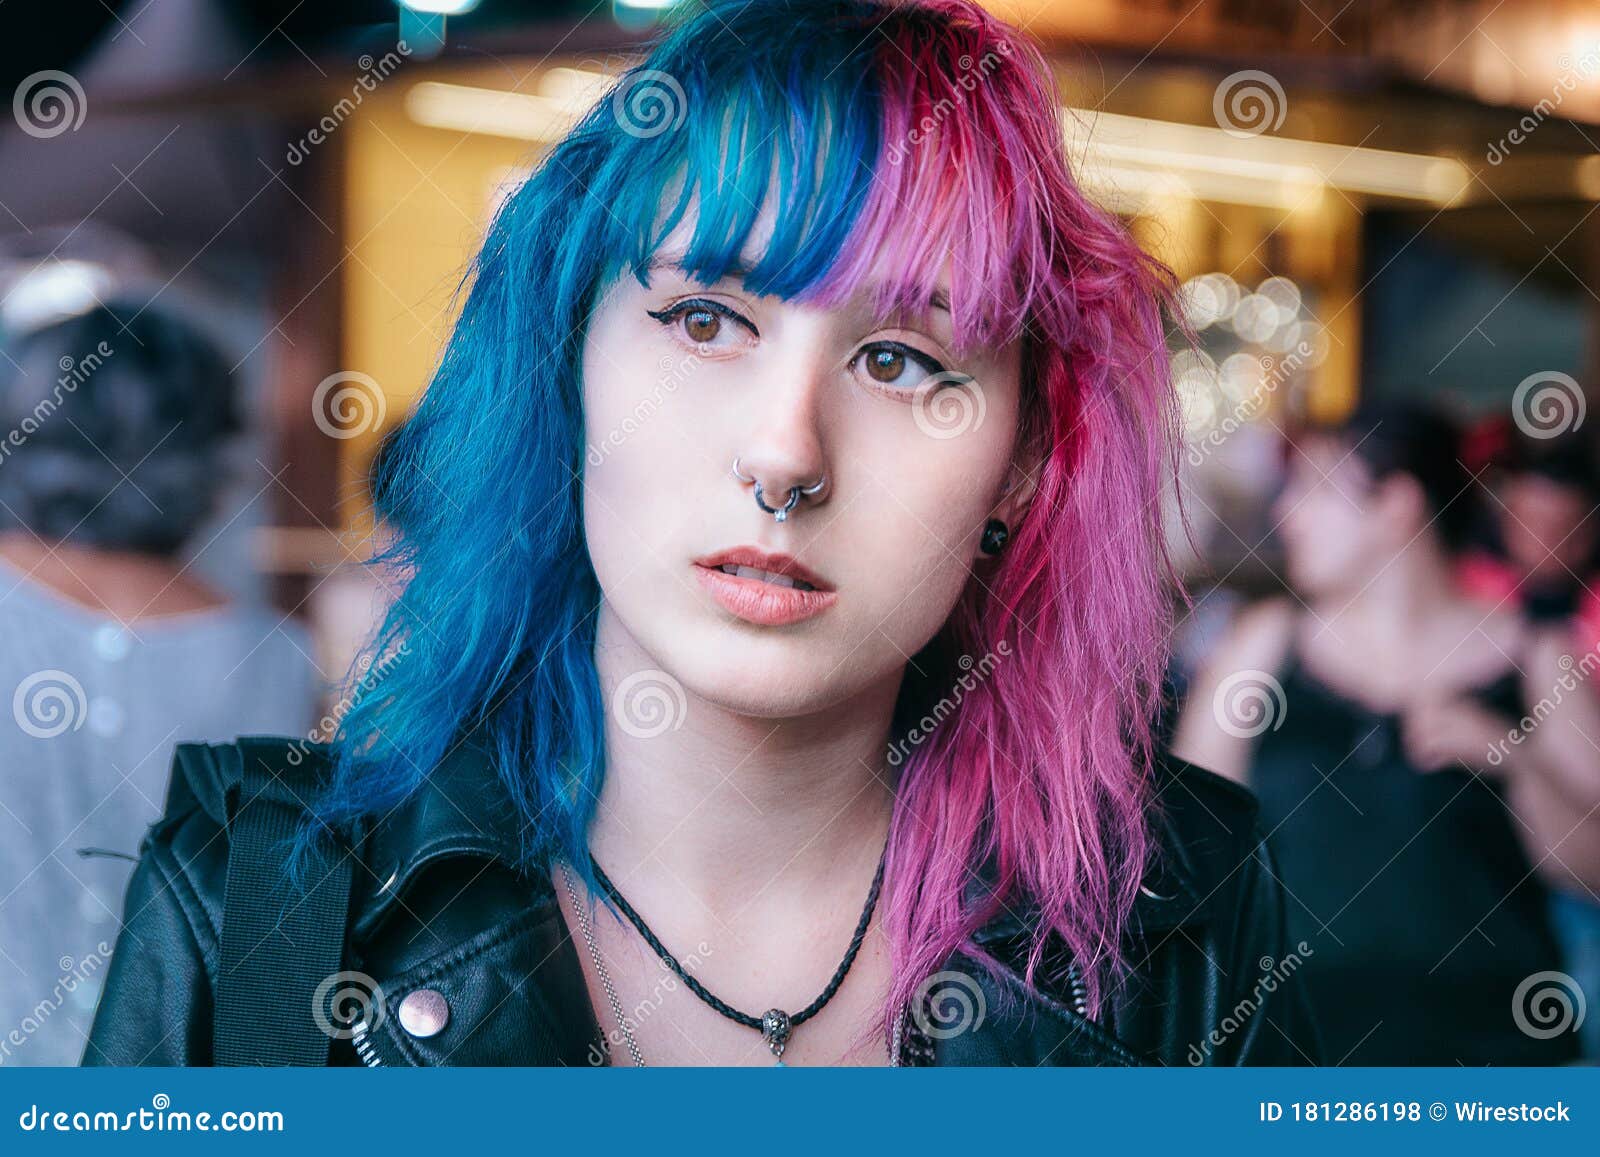 5. "Pink and Blue Hair: The Latest Men's Hair Trend" - wide 4